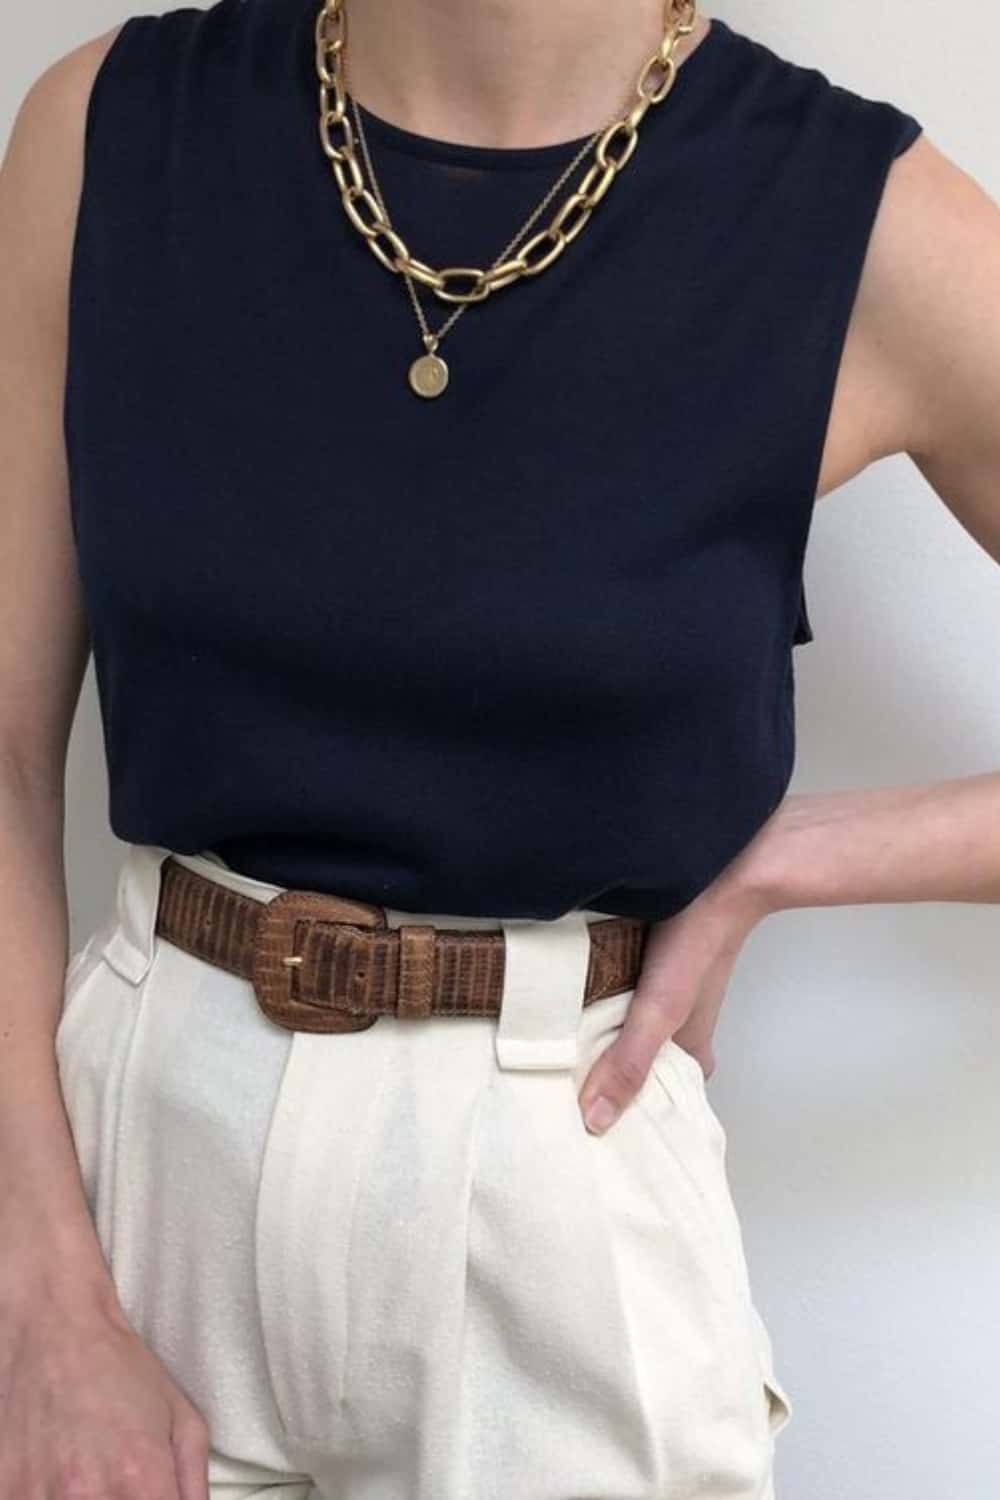 How to layer necklace casually in summer